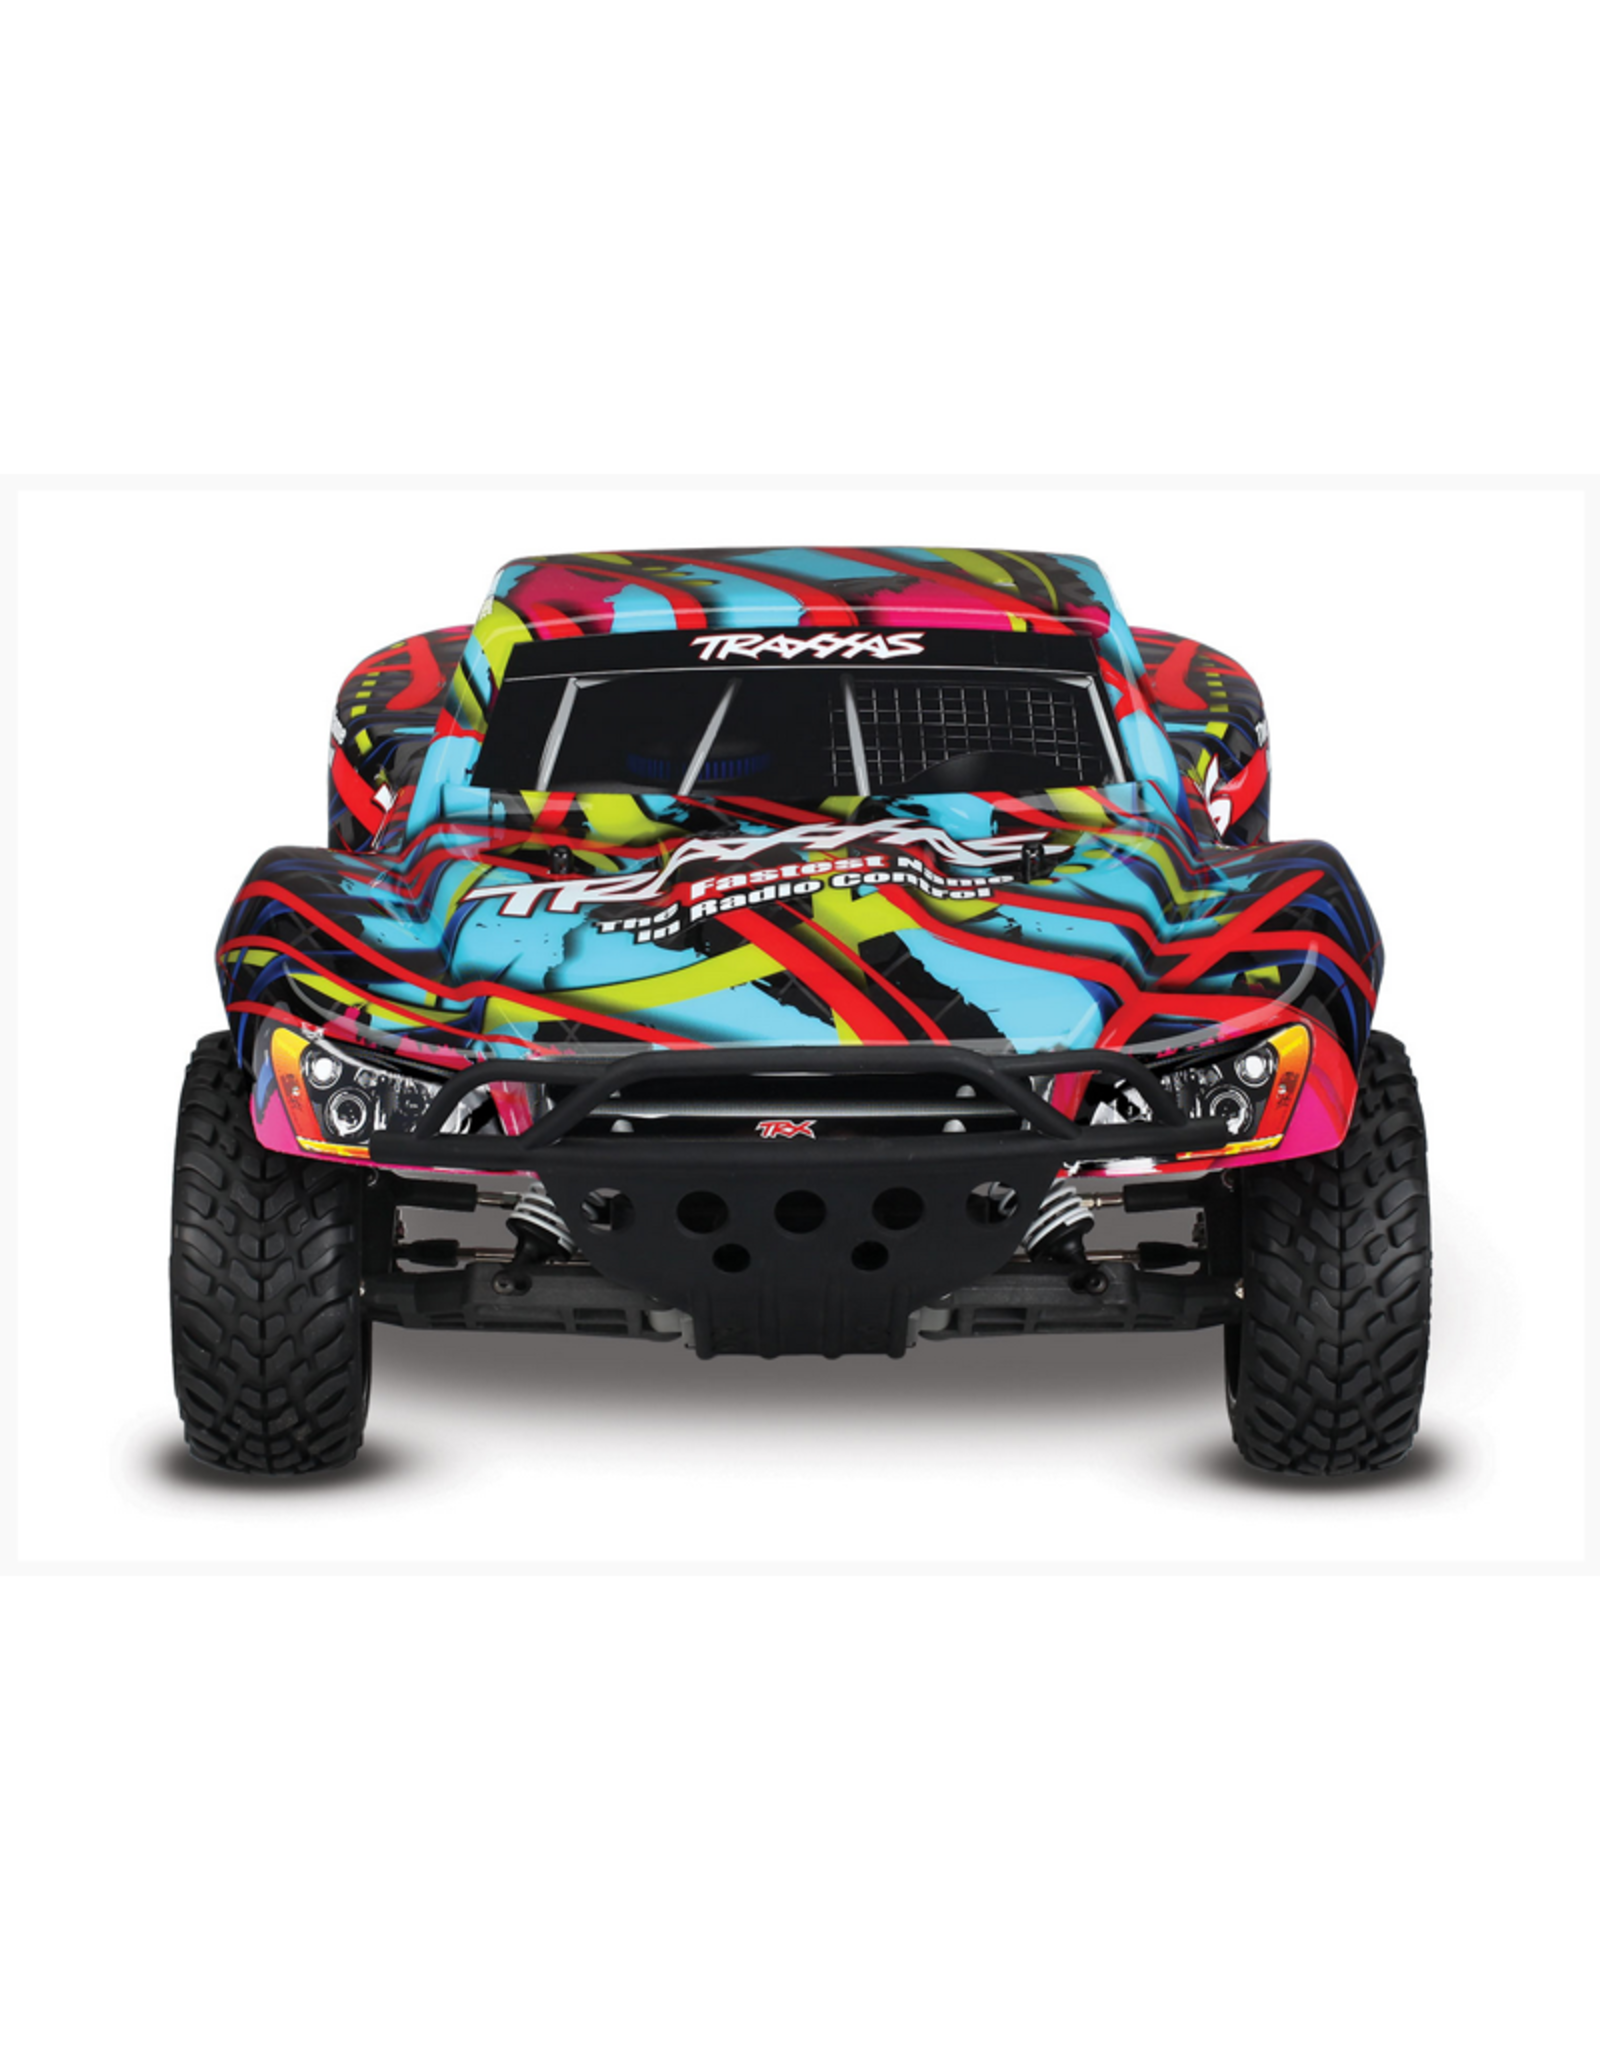 TRA58076-4 HAWAIIAN Slash VXL: 1/10 Scale 2WD Short Course Racing Truck.  Ready-to-Race® with TQi Traxxas Link™ Enabled 2.4GHz Radio System,  Velineon® VXL-3s brushless ESC (fwd/rev), and Traxxas Stability Management  (TSM)®. - HobbyQuarters